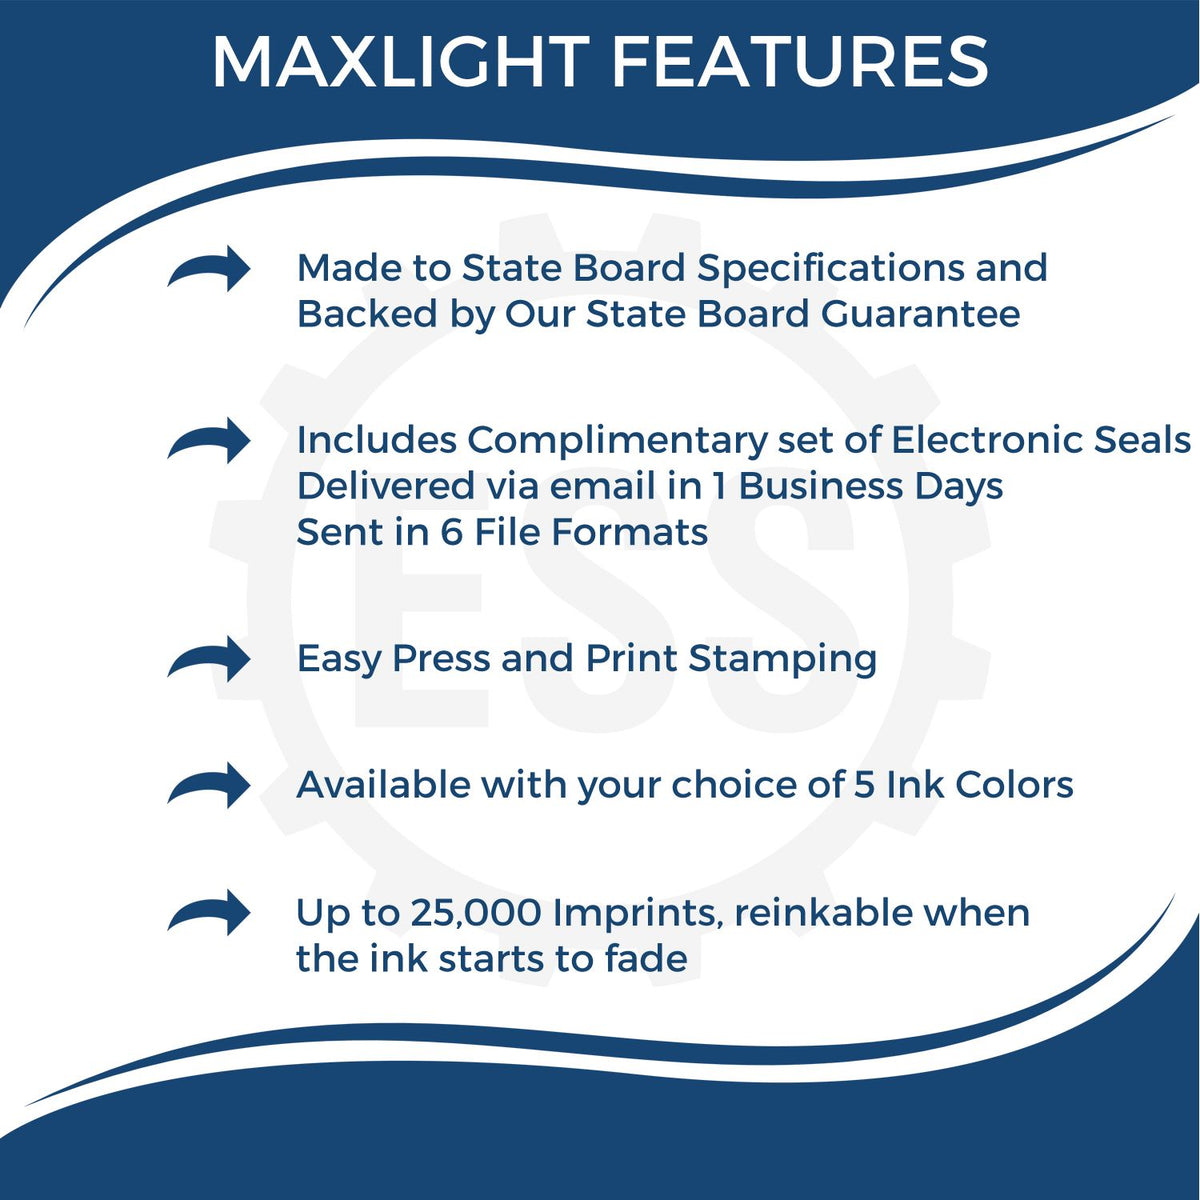 A picture of an infographic highlighting the selling points for the Premium MaxLight Pre-Inked Hawaii Engineering Stamp